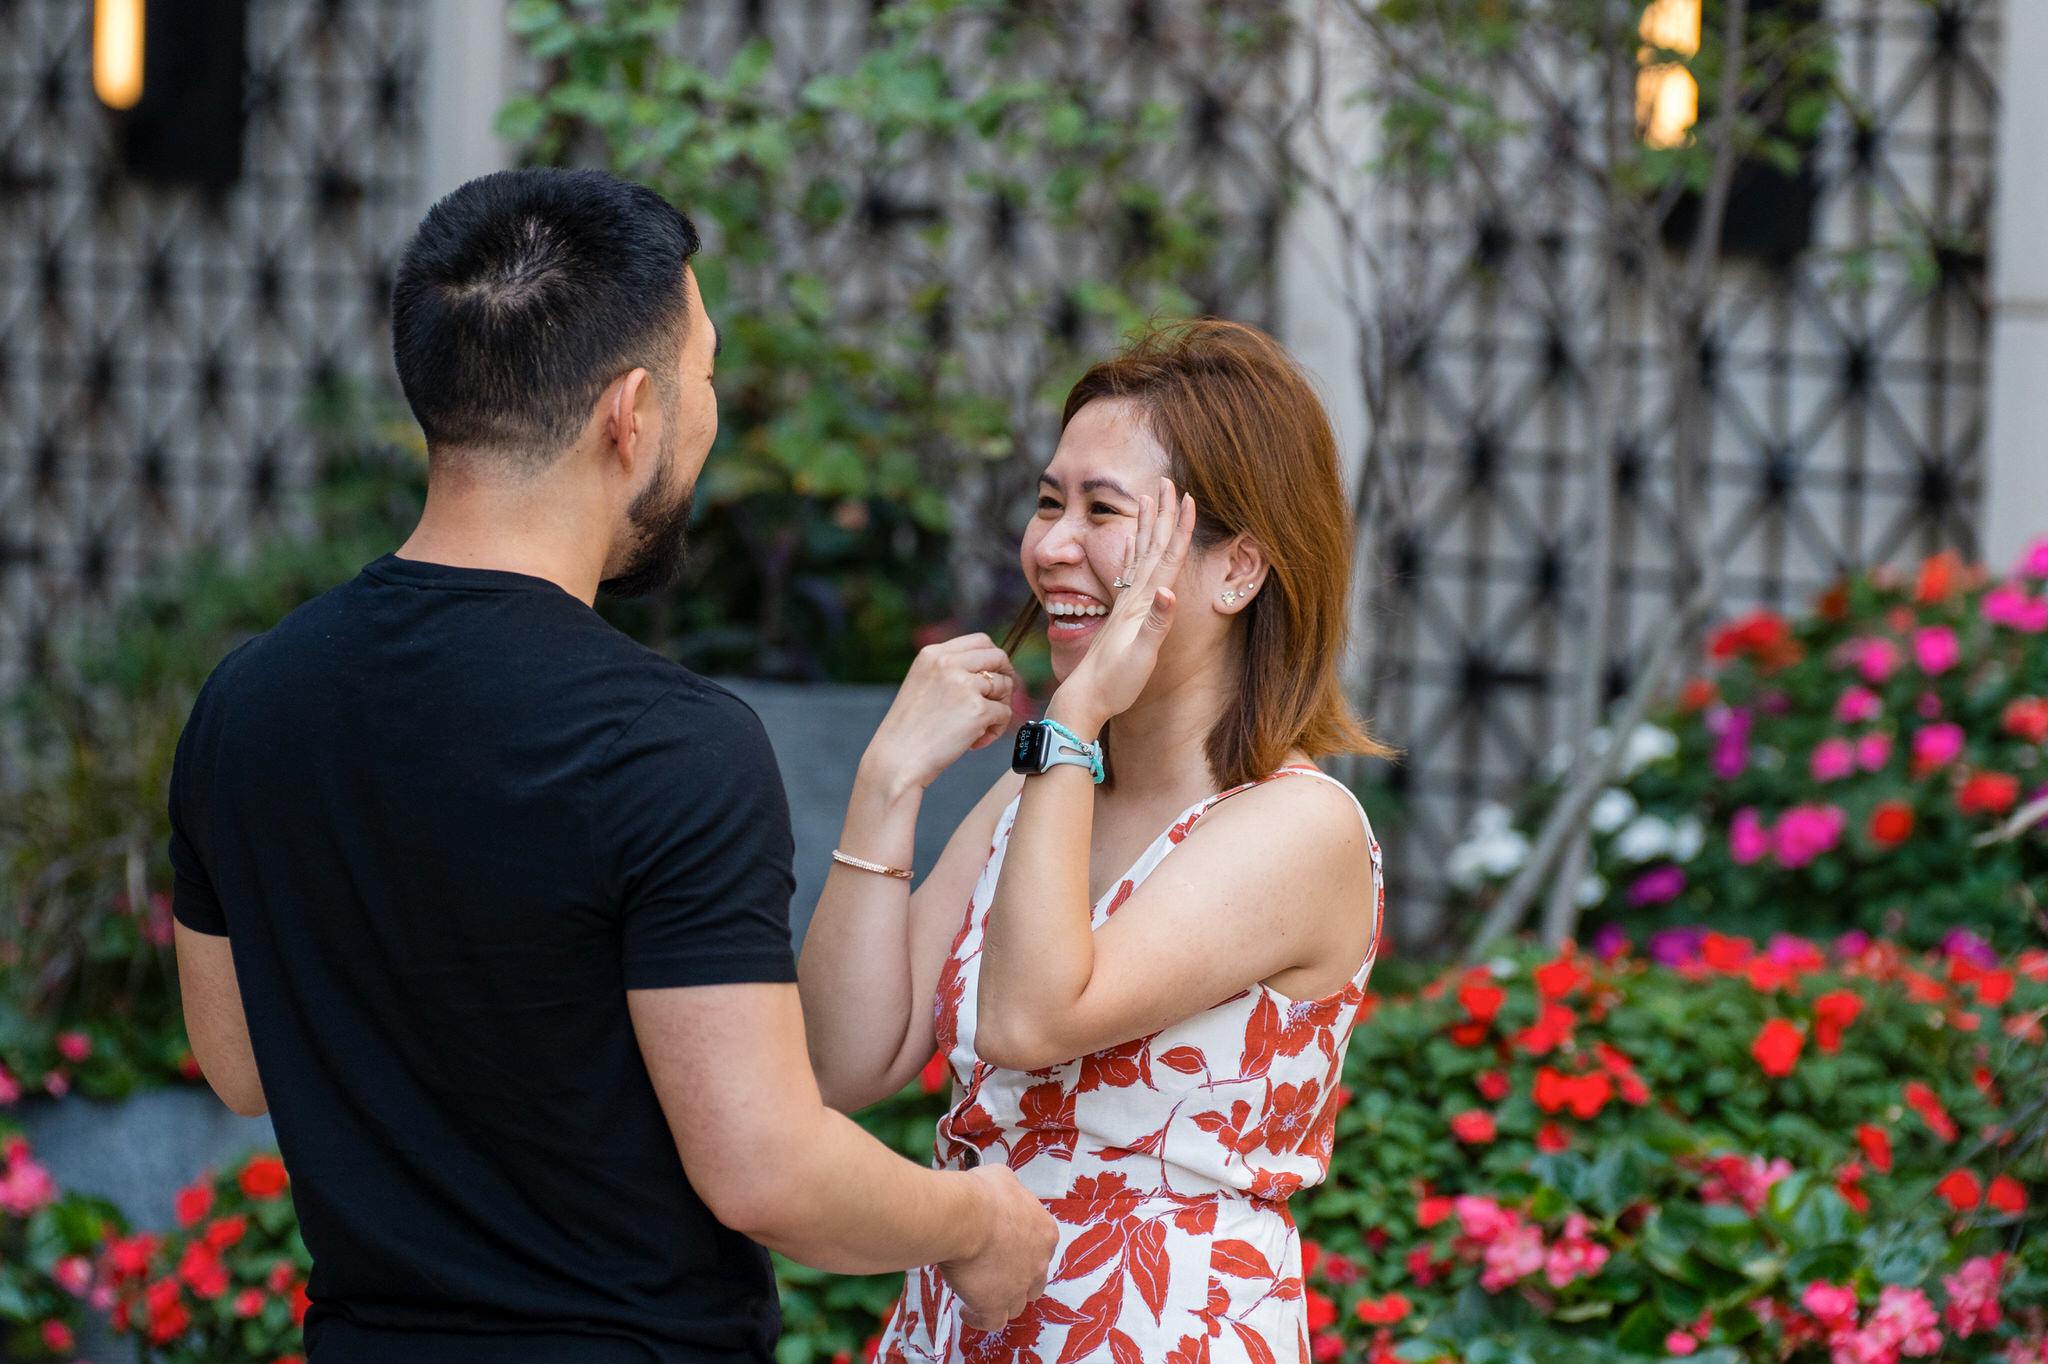 A new fiance shows off her ring and celebrates after a Townhouse proposal.  